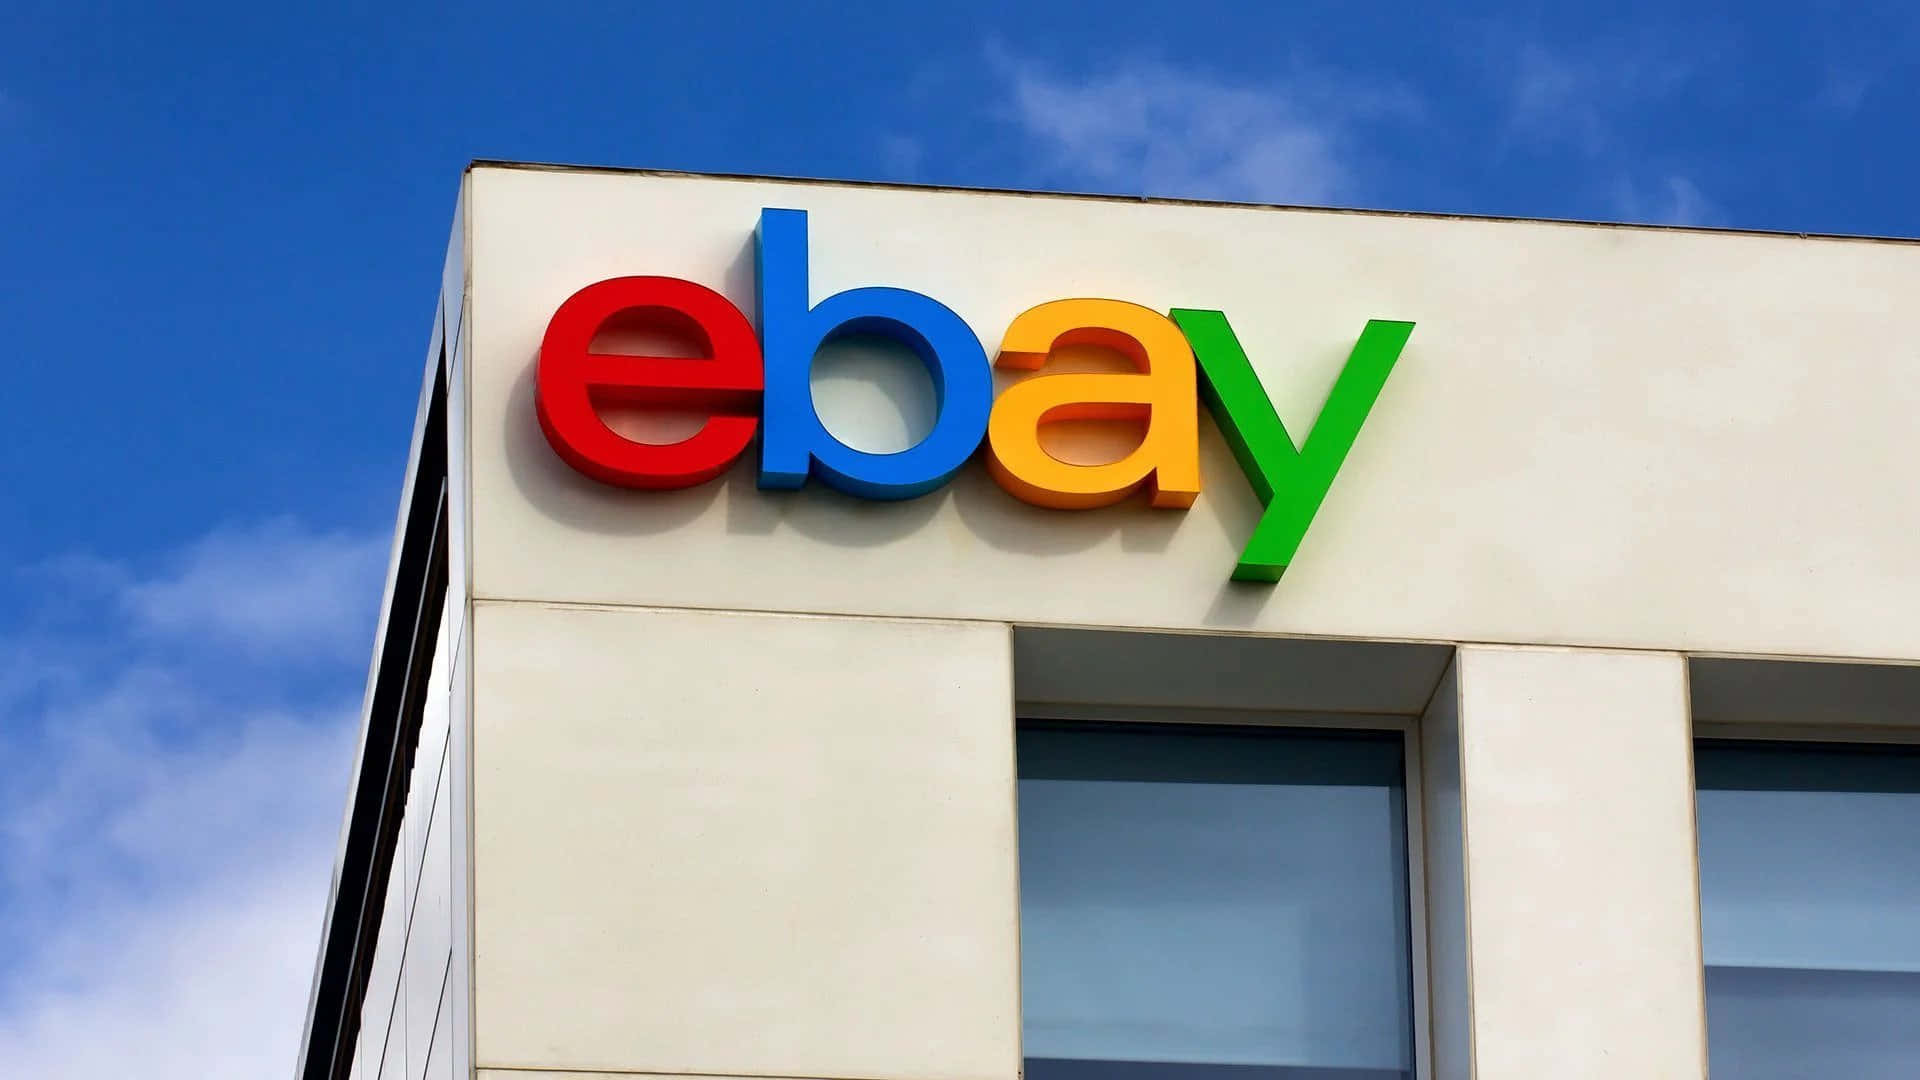 Shop an endless selection of products on eBay